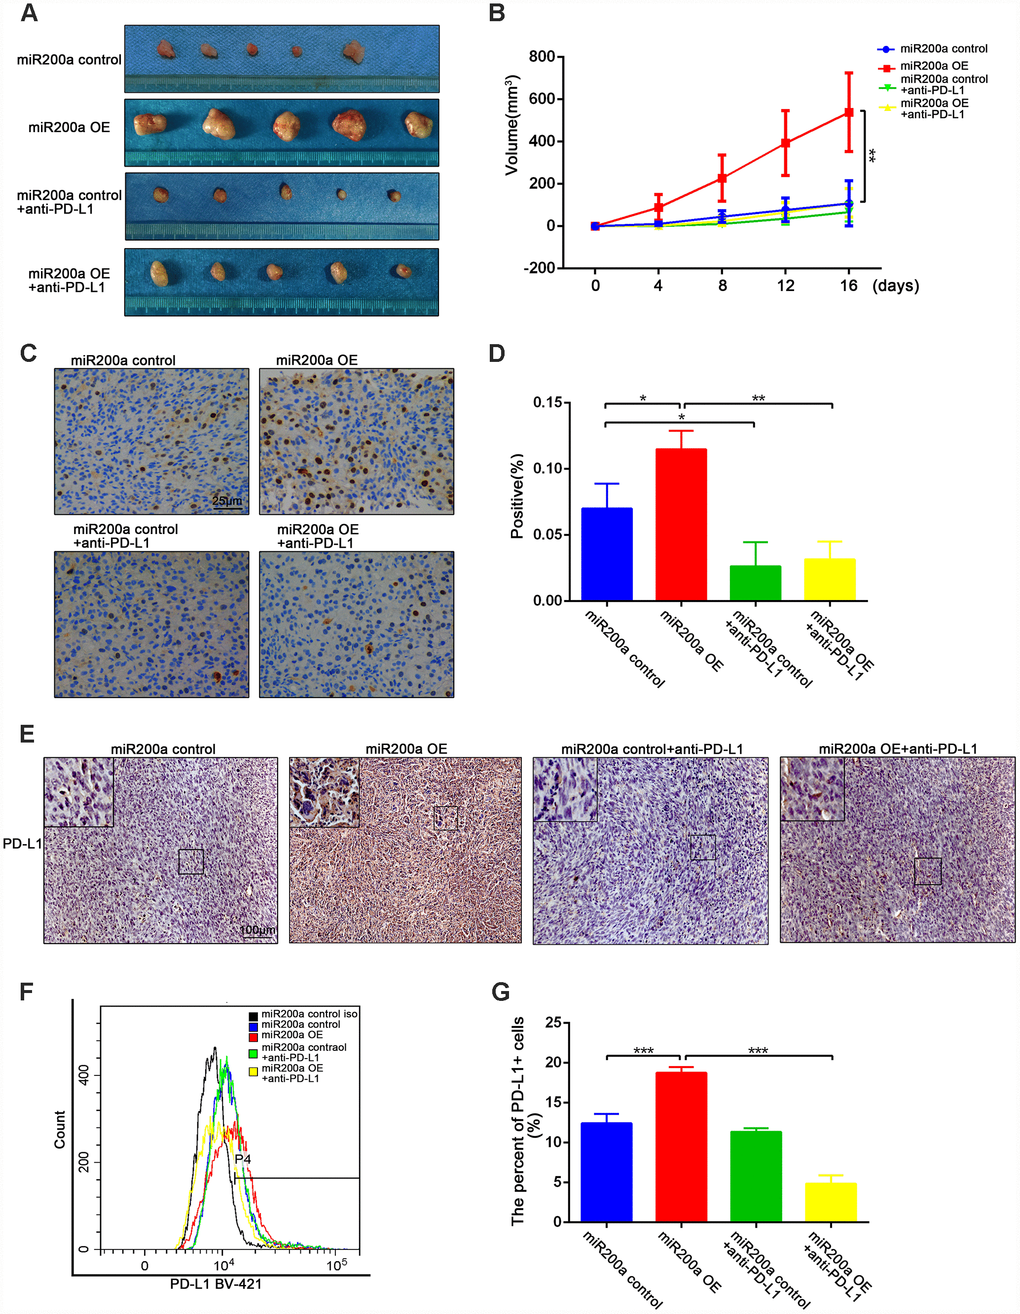 miR-200a promoted tumor growth by up-regulating the expression of PD-L1 in vivo. (A) miR-200a promoted the growth of osteosarcoma through up-regulating PD-L1. (B) Quantification of tumor volume. (C–D) Immunohistochemical staining analysis of ki-67 expression in tumor tissues. Scale bar represents 50μm. (E) Immunohistochemical staining analysis of PD-L1 expression in tumor tissues. Scale bar represents 100μm. (F–G) Flow cytometry analysis of PD-L1 expression in tumor tissues. *P